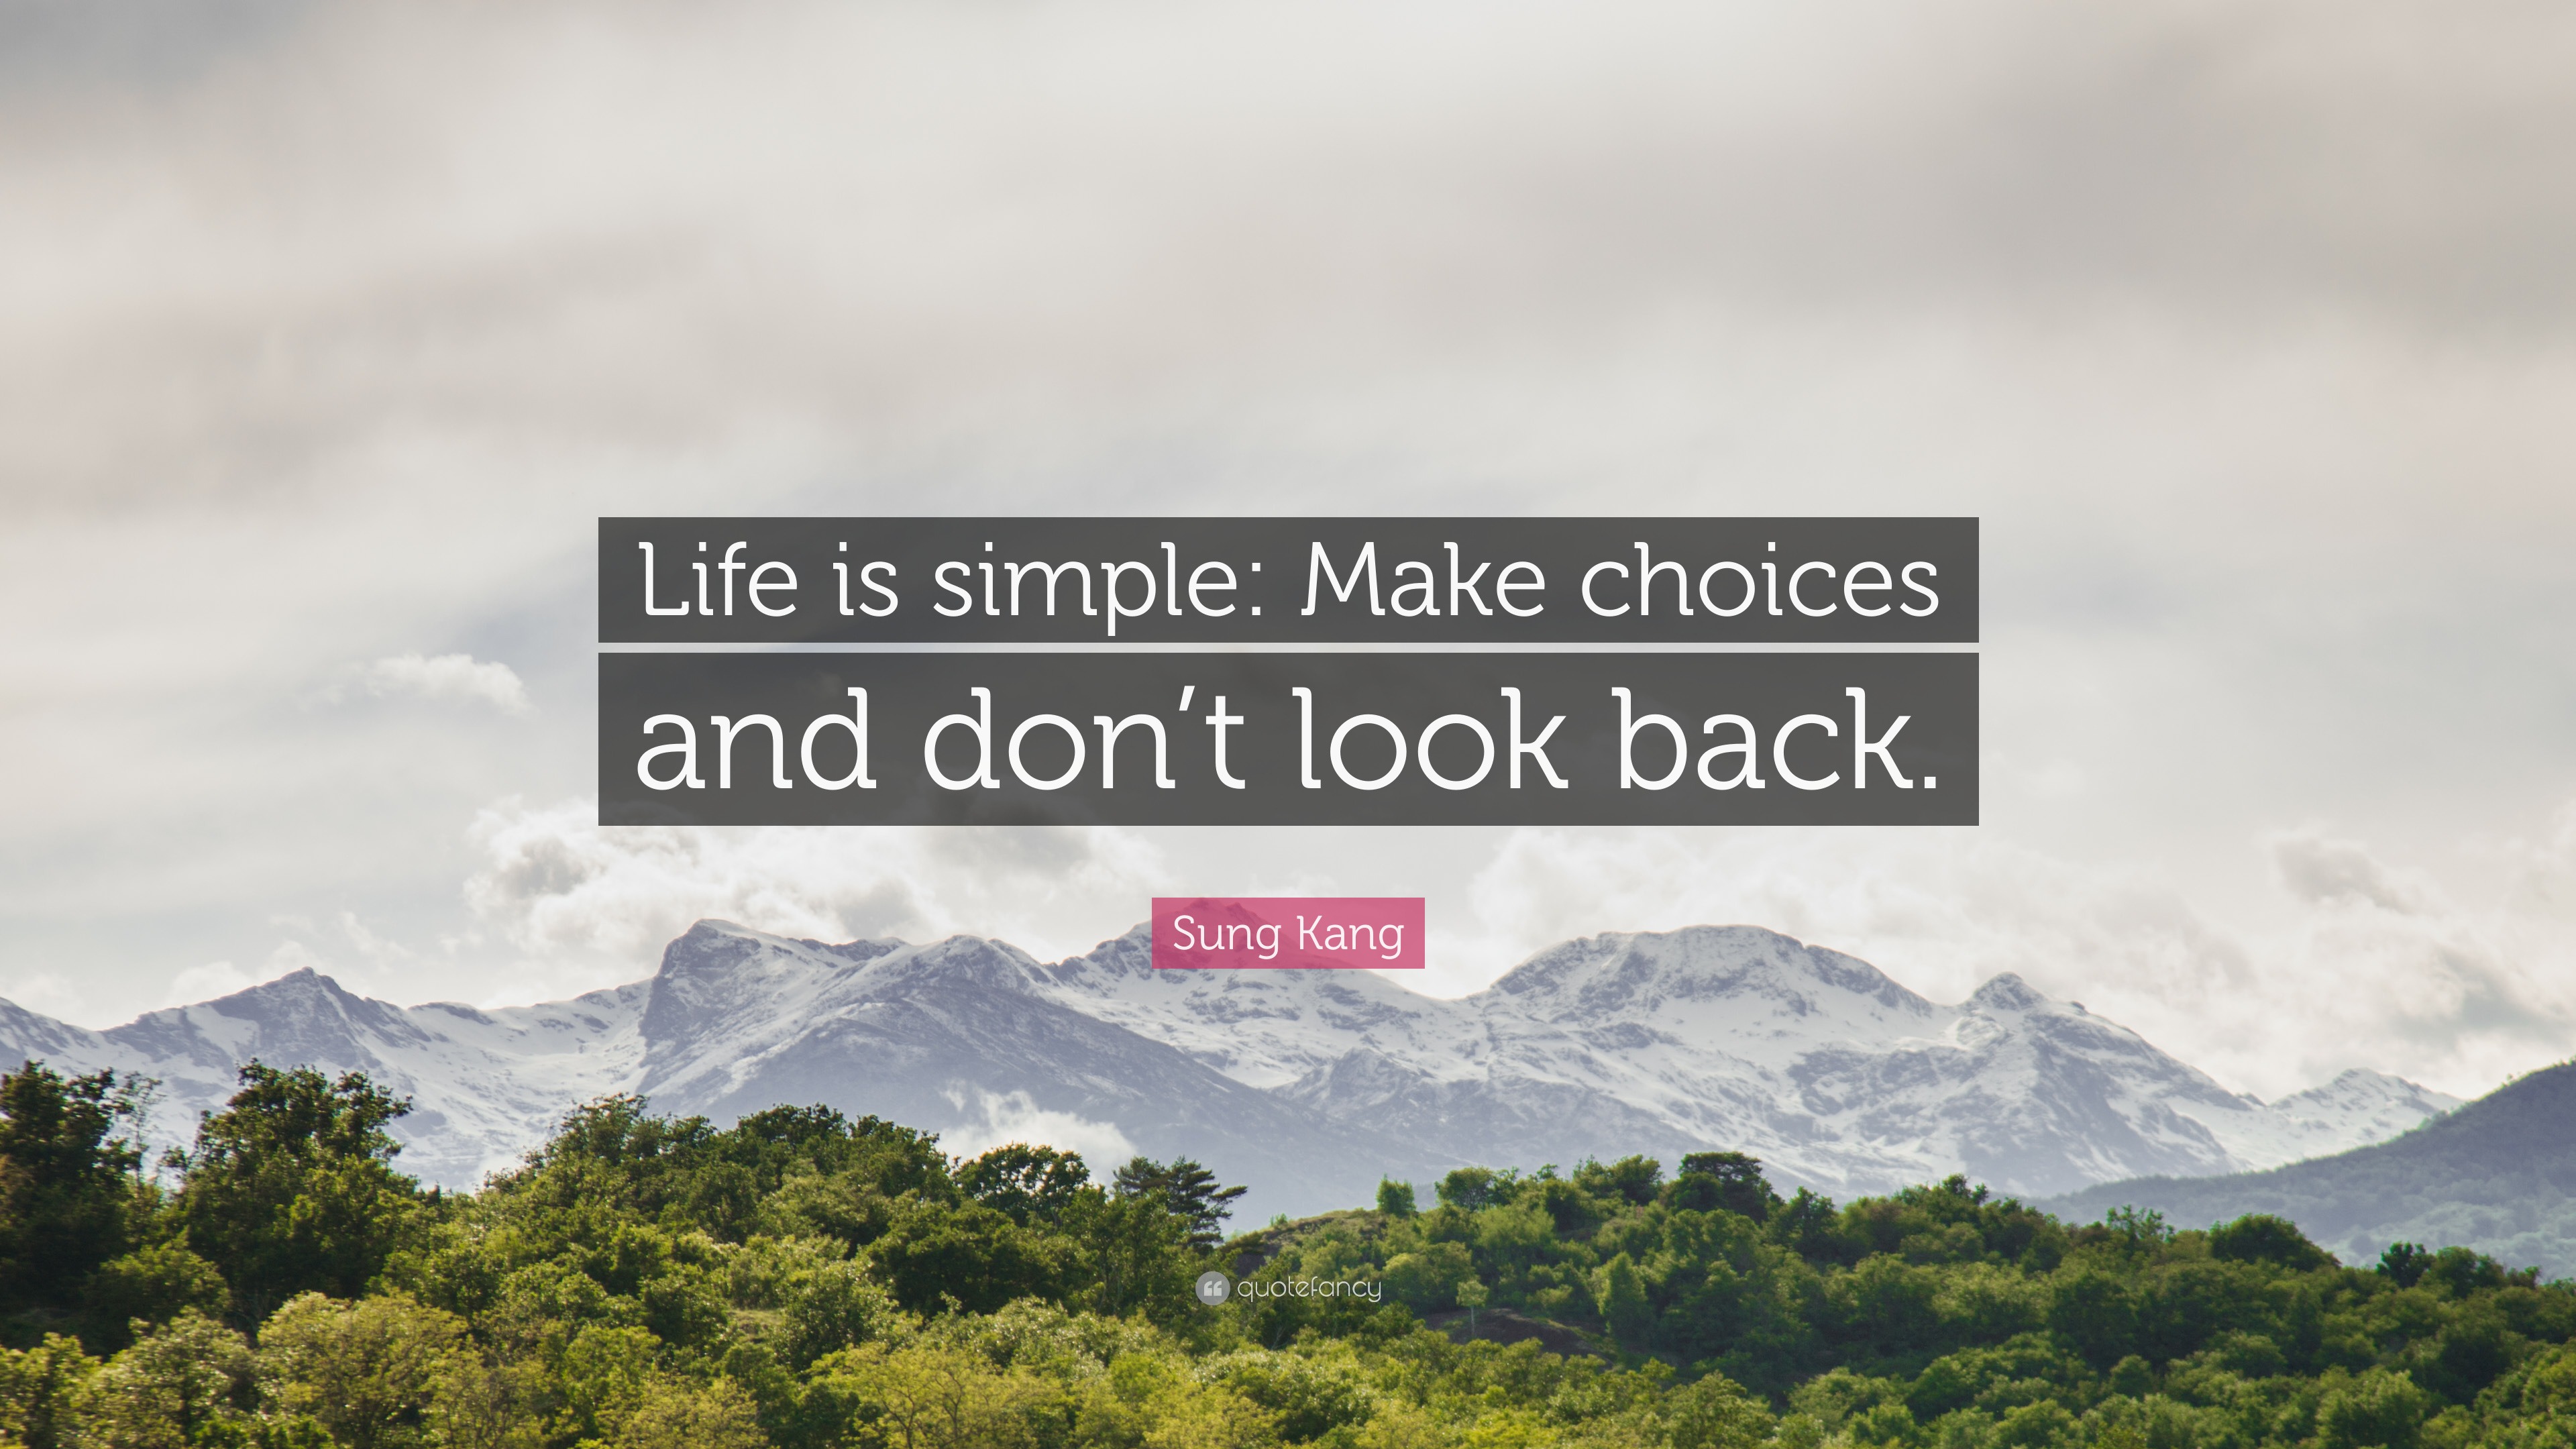 Sung Kang Quote: “Life is simple: Make choices and don't look back.”